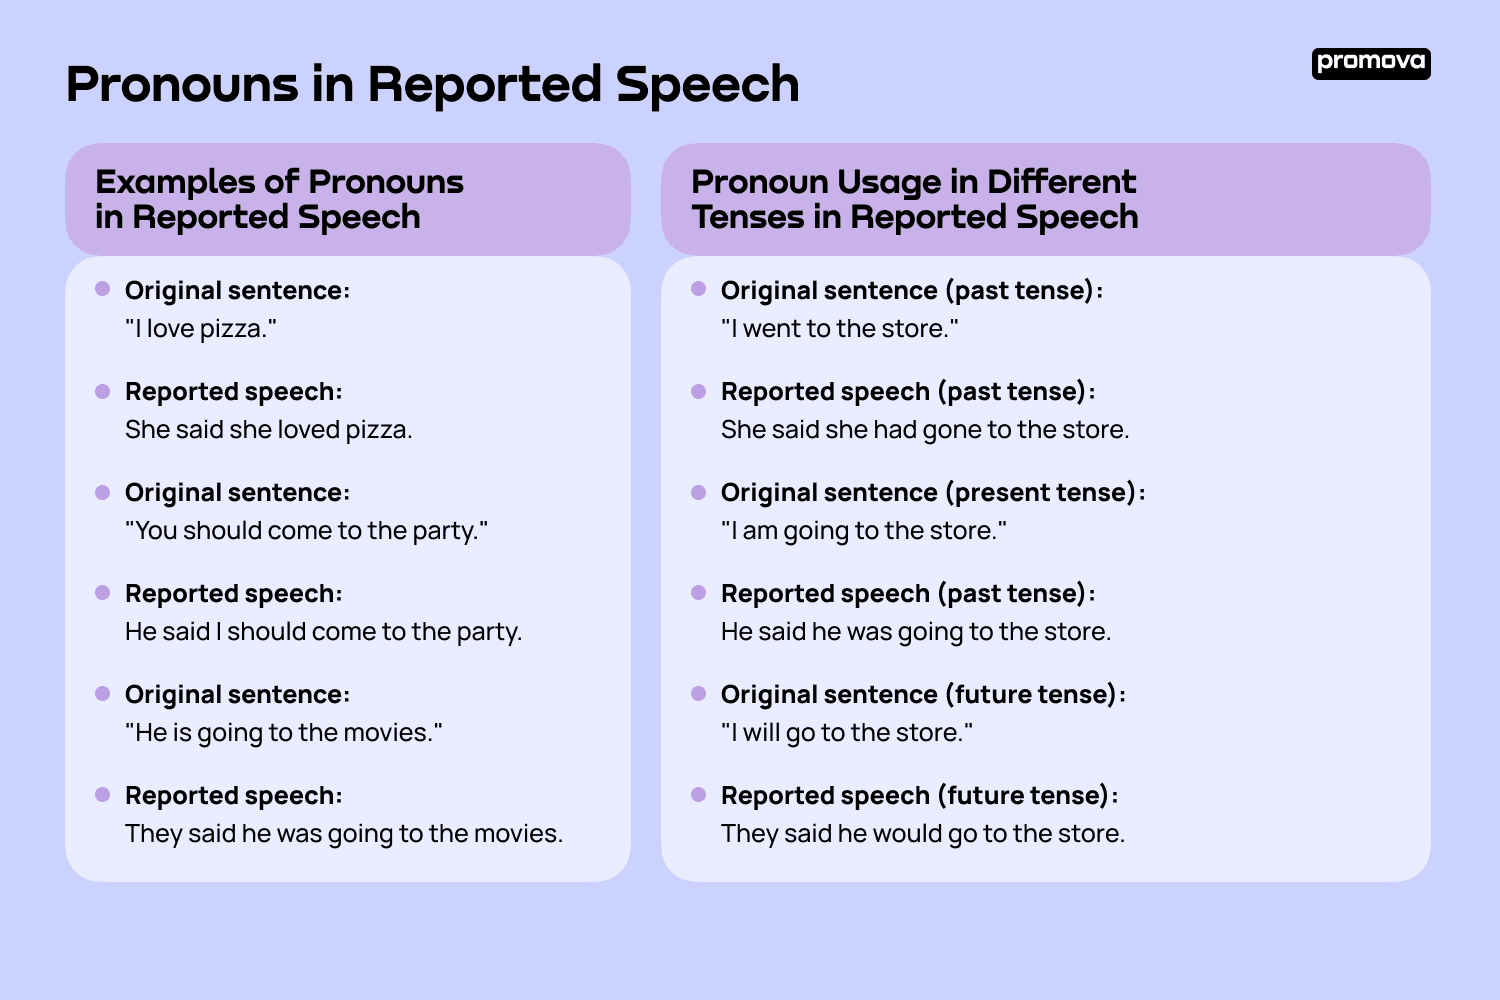 Examples of Pronouns in Reported Speech